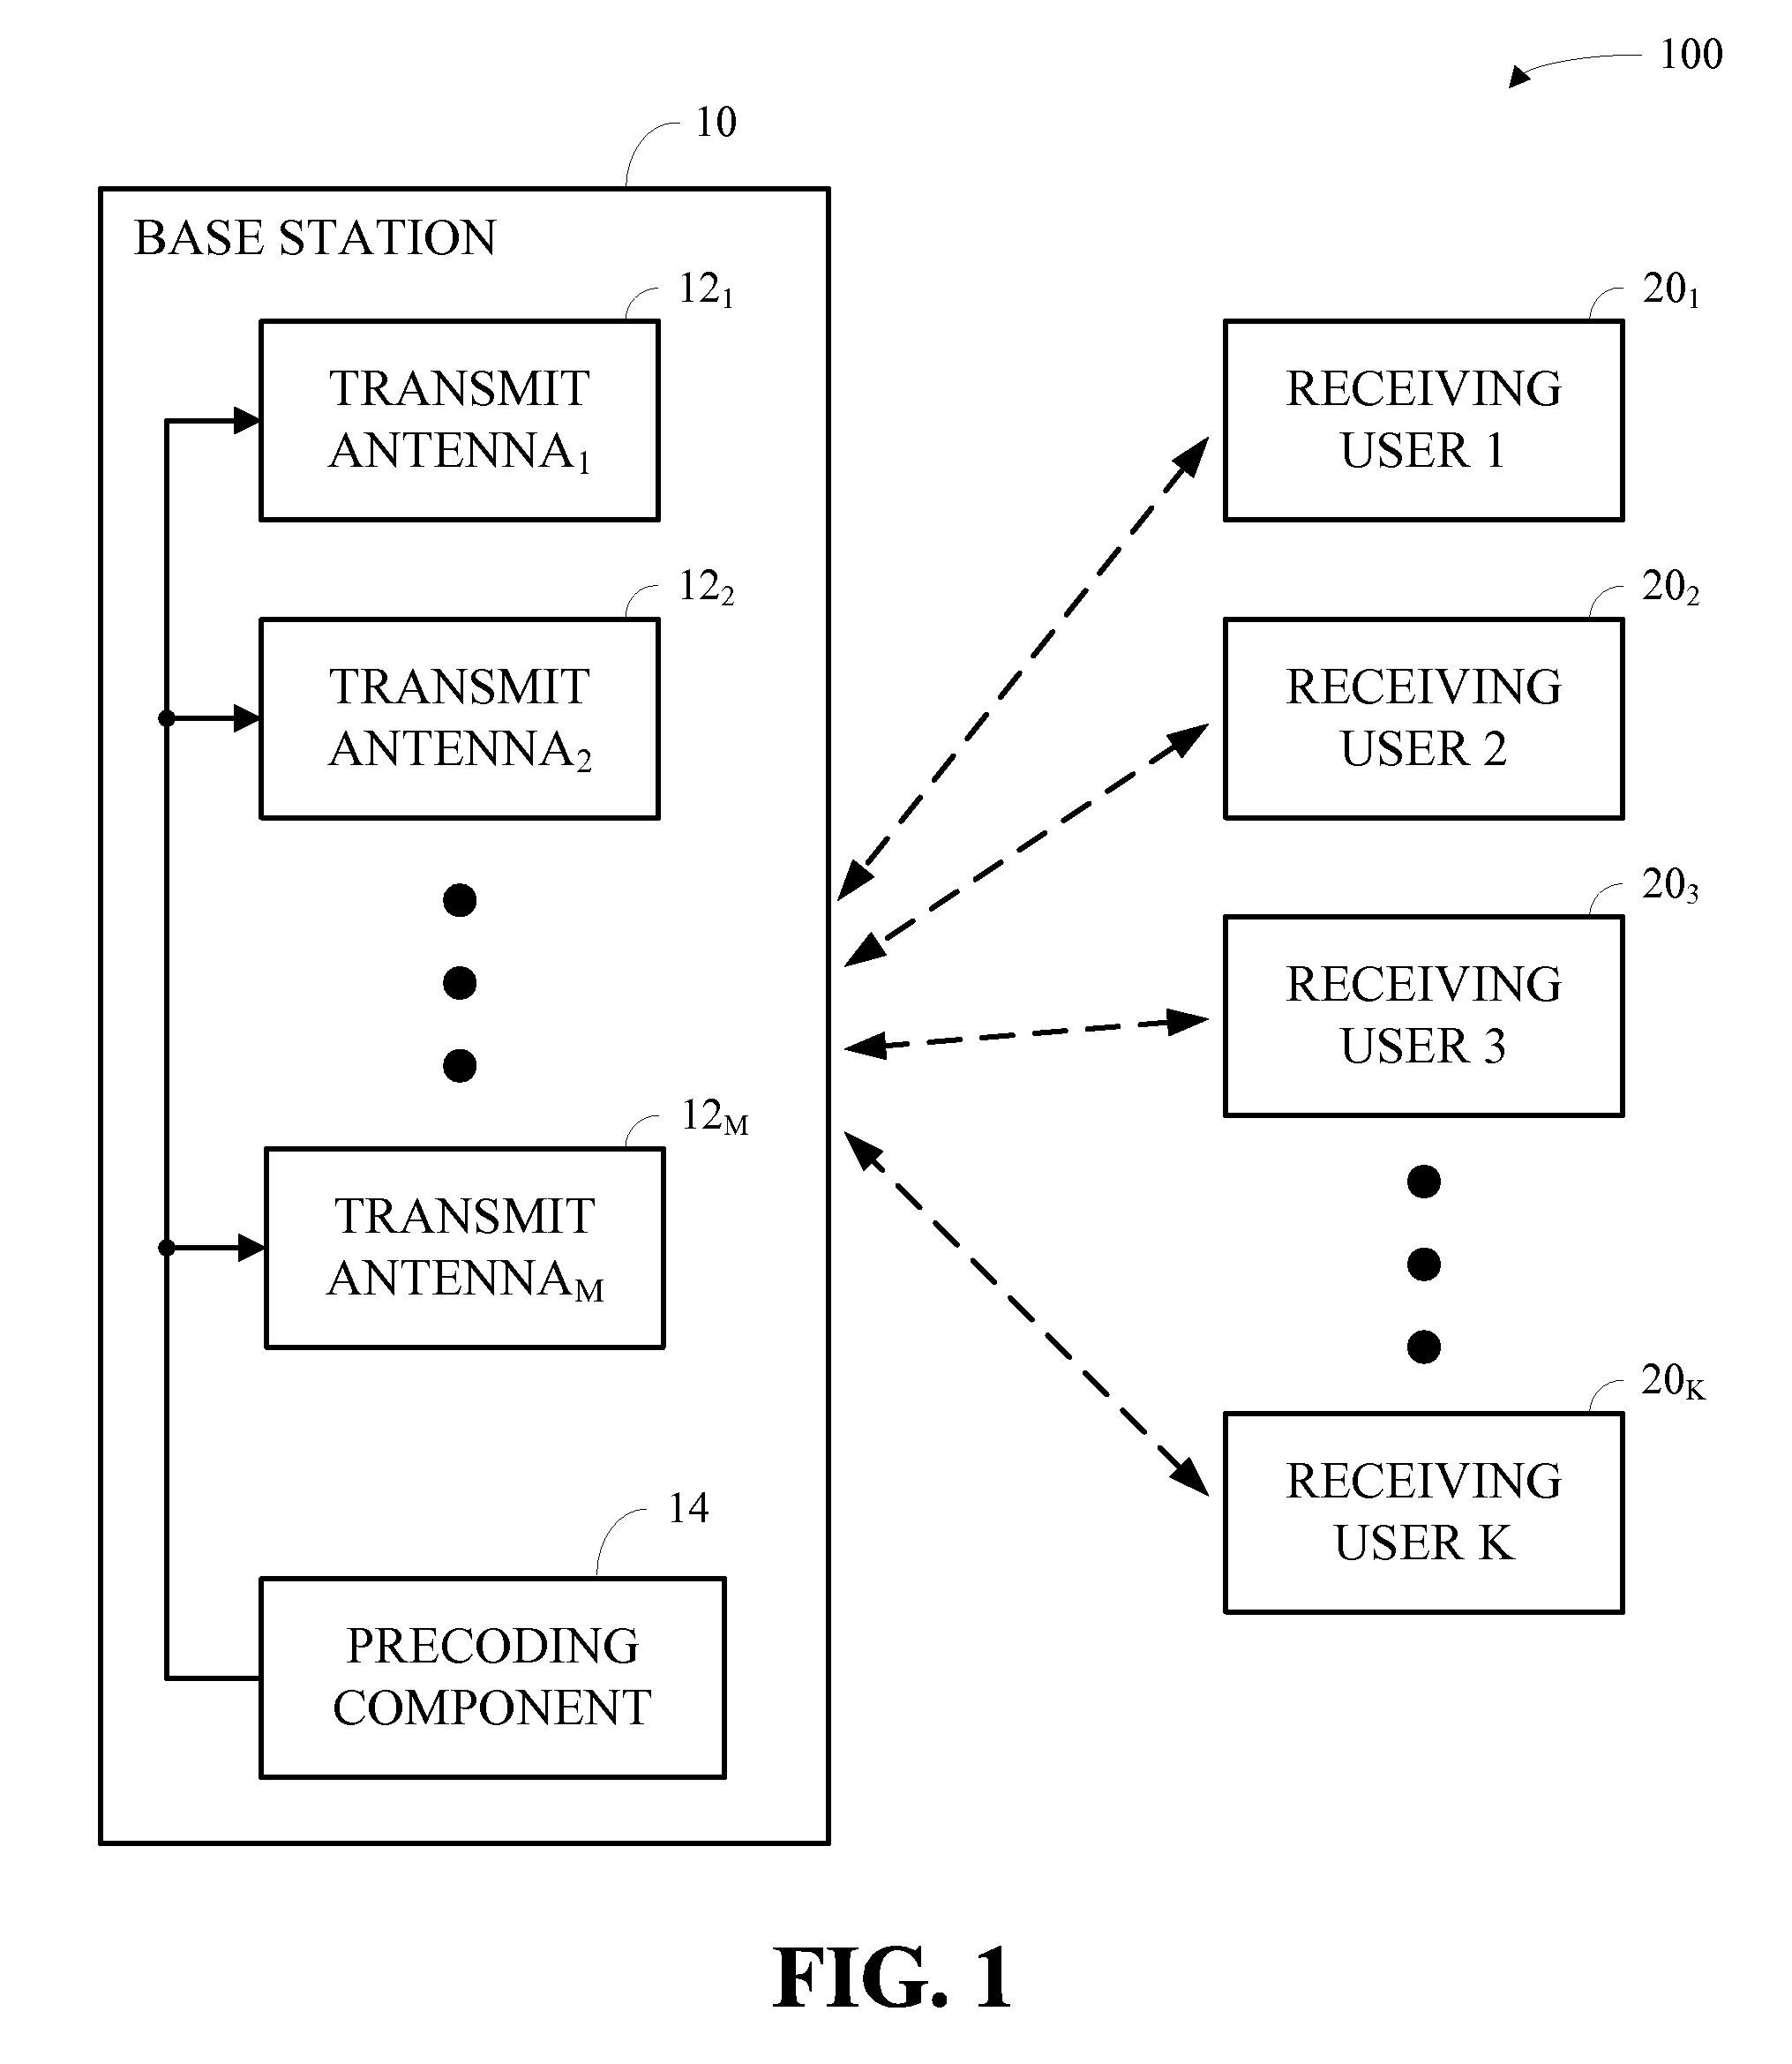 Adaptive multi-user MIMO non-cooperative threshold-based wireless communication system using limited channel feedback